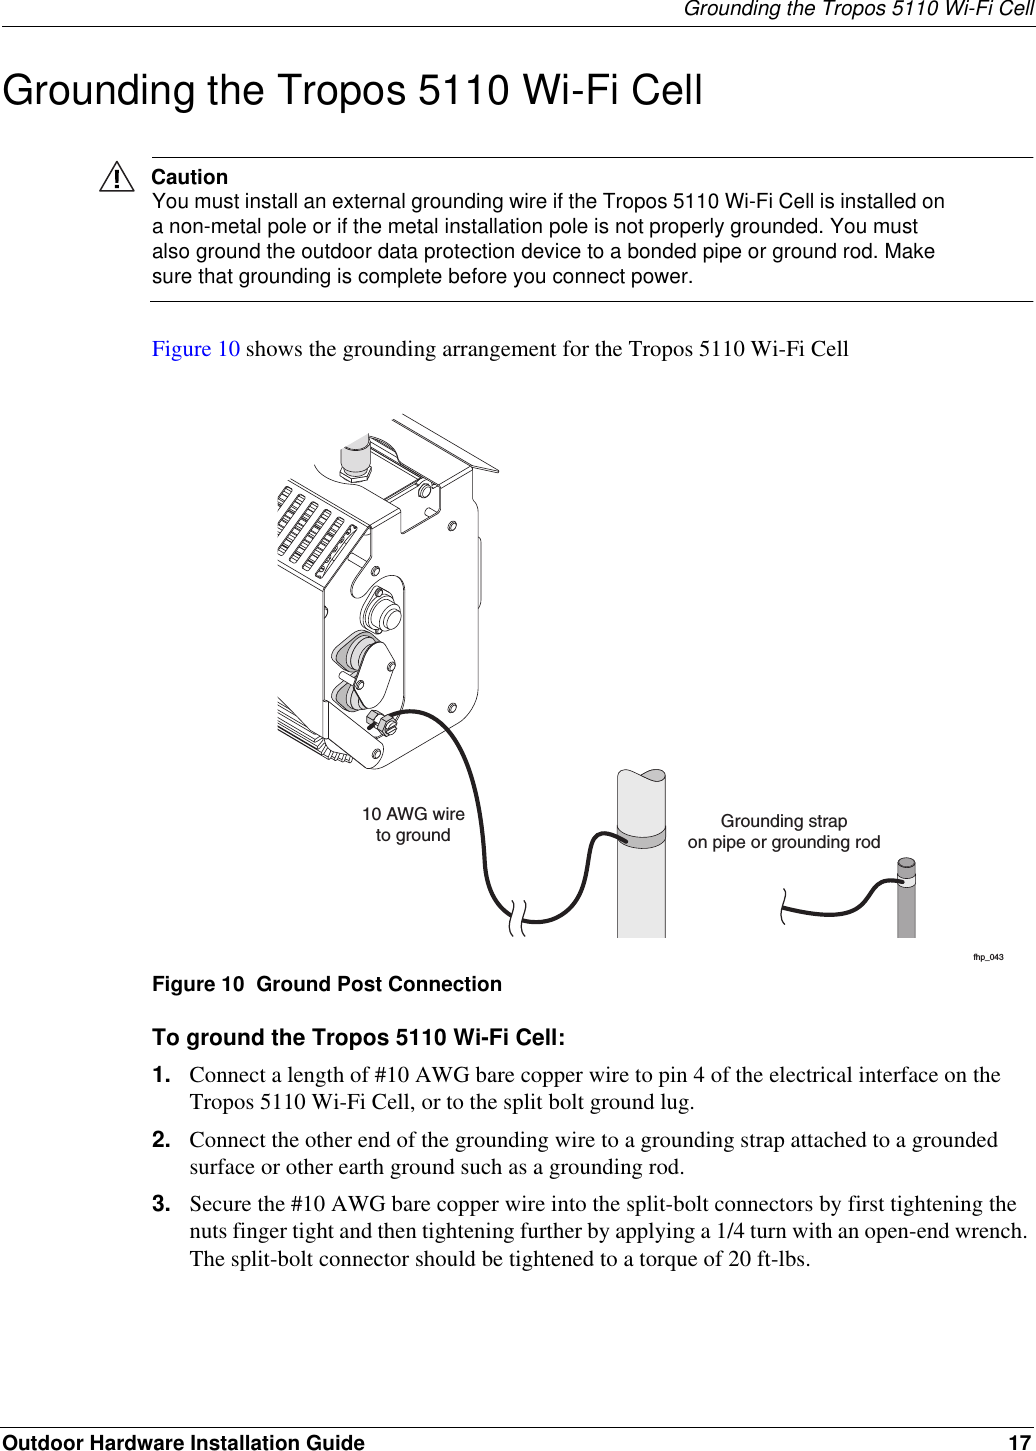 Grounding the Tropos 5110 Wi-Fi CellOutdoor Hardware Installation Guide 17Grounding the Tropos 5110 Wi-Fi CellCautionYou must install an external grounding wire if the Tropos 5110 Wi-Fi Cell is installed on a non-metal pole or if the metal installation pole is not properly grounded. You must also ground the outdoor data protection device to a bonded pipe or ground rod. Make sure that grounding is complete before you connect power.Figure 10 shows the grounding arrangement for the Tropos 5110 Wi-Fi Cell Figure 10  Ground Post ConnectionTo ground the Tropos 5110 Wi-Fi Cell:1. Connect a length of #10 AWG bare copper wire to pin 4 of the electrical interface on the Tropos 5110 Wi-Fi Cell, or to the split bolt ground lug.2. Connect the other end of the grounding wire to a grounding strap attached to a grounded surface or other earth ground such as a grounding rod.3. Secure the #10 AWG bare copper wire into the split-bolt connectors by first tightening the nuts finger tight and then tightening further by applying a 1/4 turn with an open-end wrench. The split-bolt connector should be tightened to a torque of 20 ft-lbs.fhp_04310 AWG wireto ground Grounding strapon pipe or grounding rod